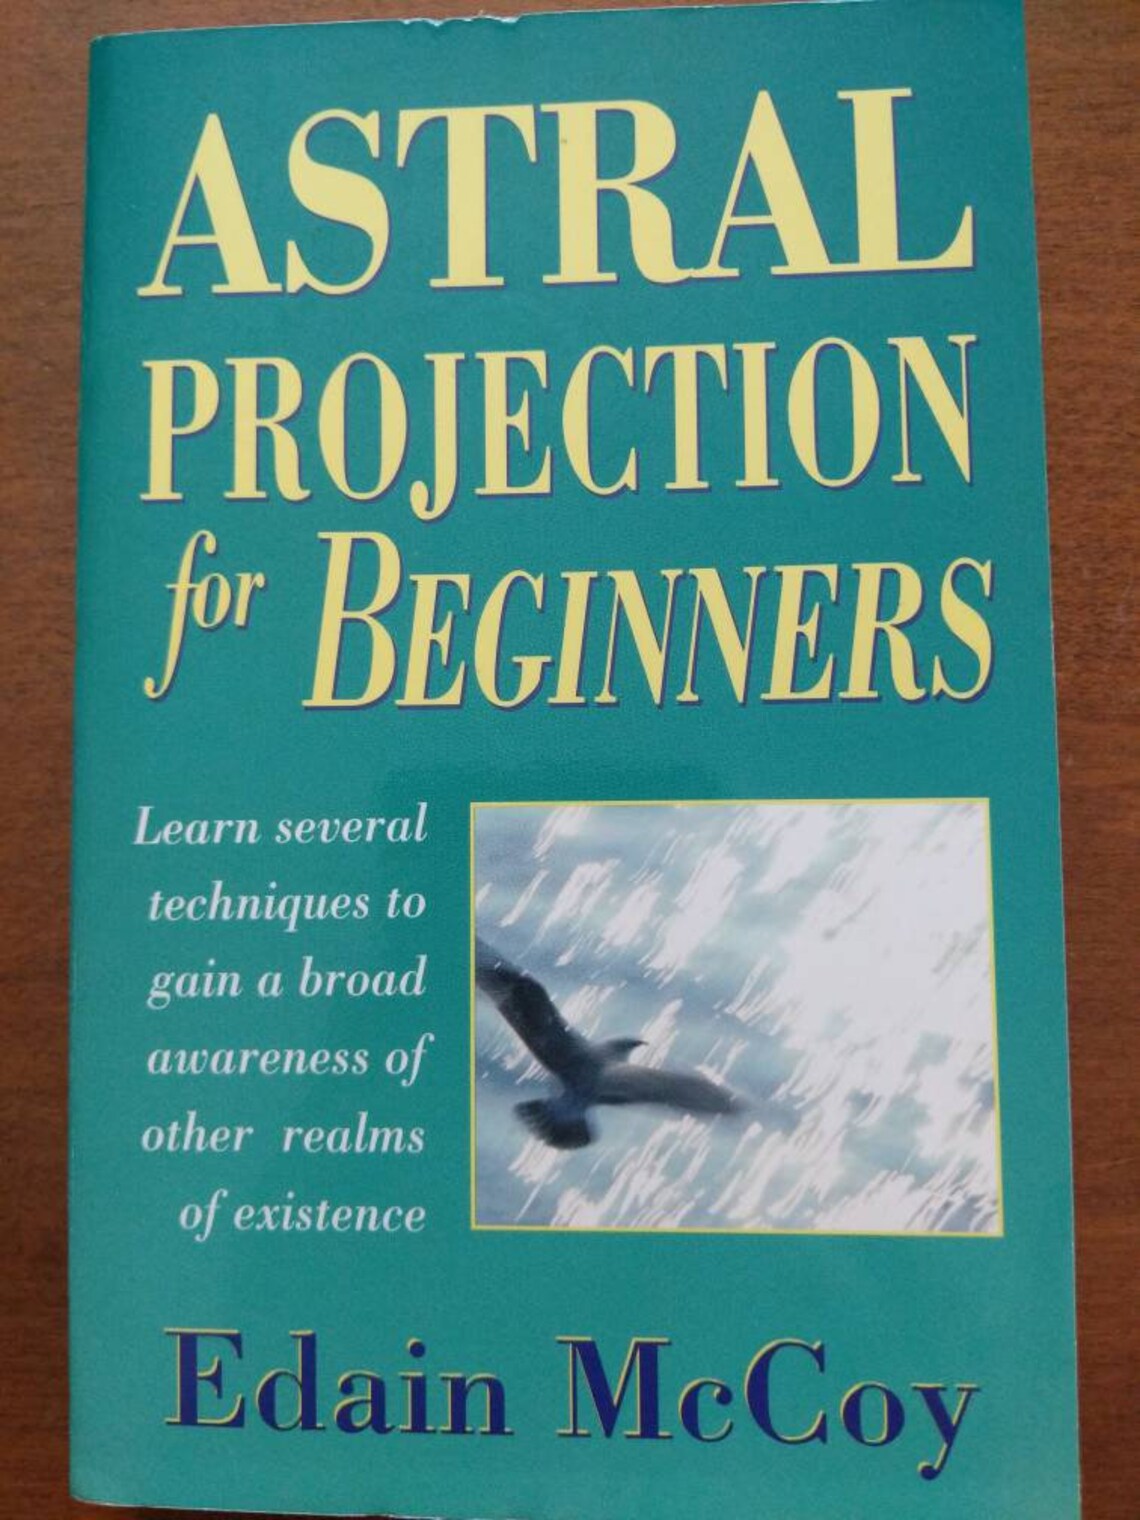 ASTRAL PROJECTION FOR BEGINNERS